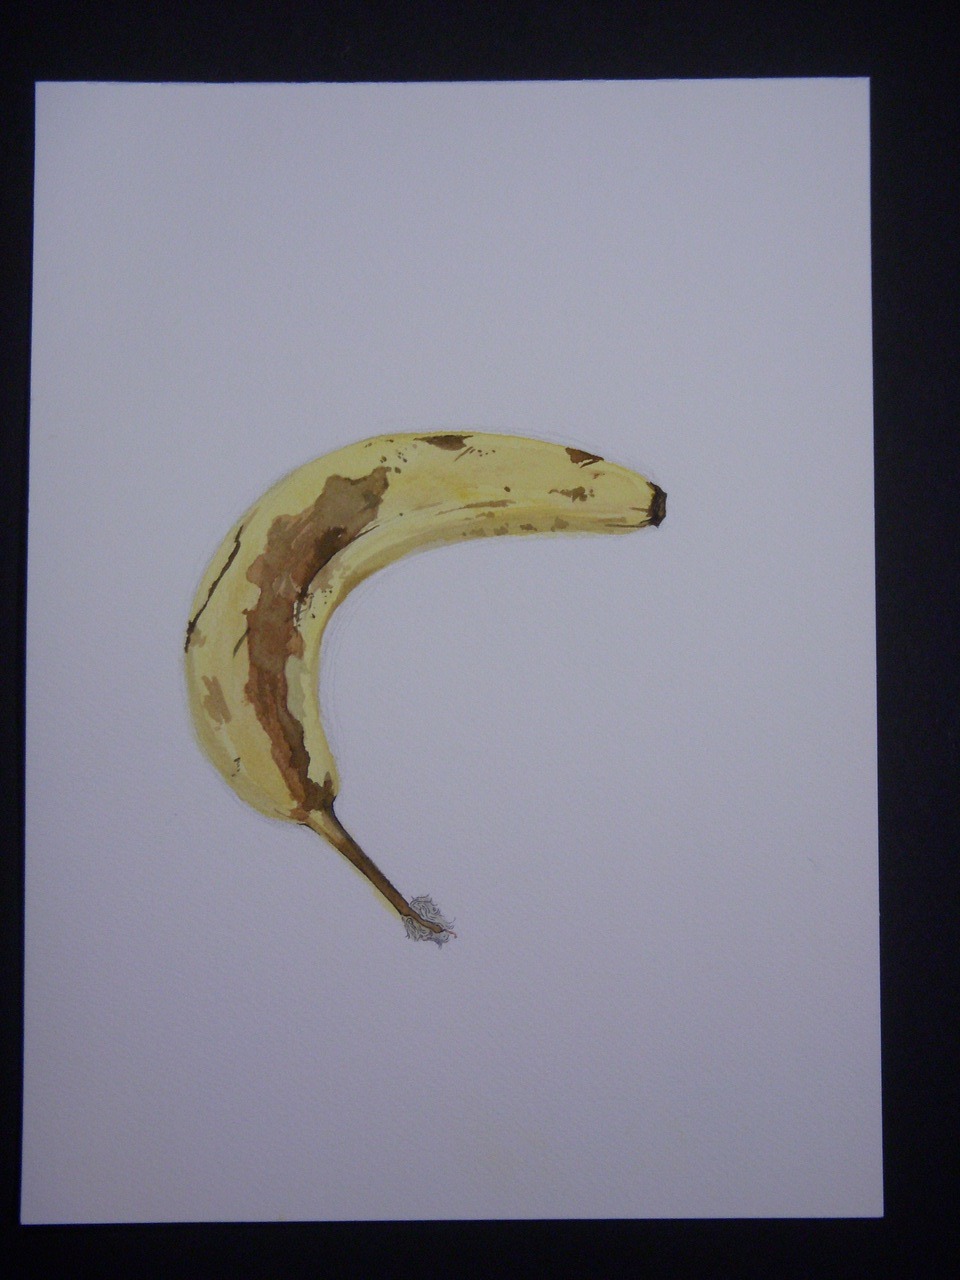 Watercolor. Mean to be turned to the right, but whateve’s. Banana’s are awesome. I ate the model after our session was over. It was delicious. - Jillian Stiles